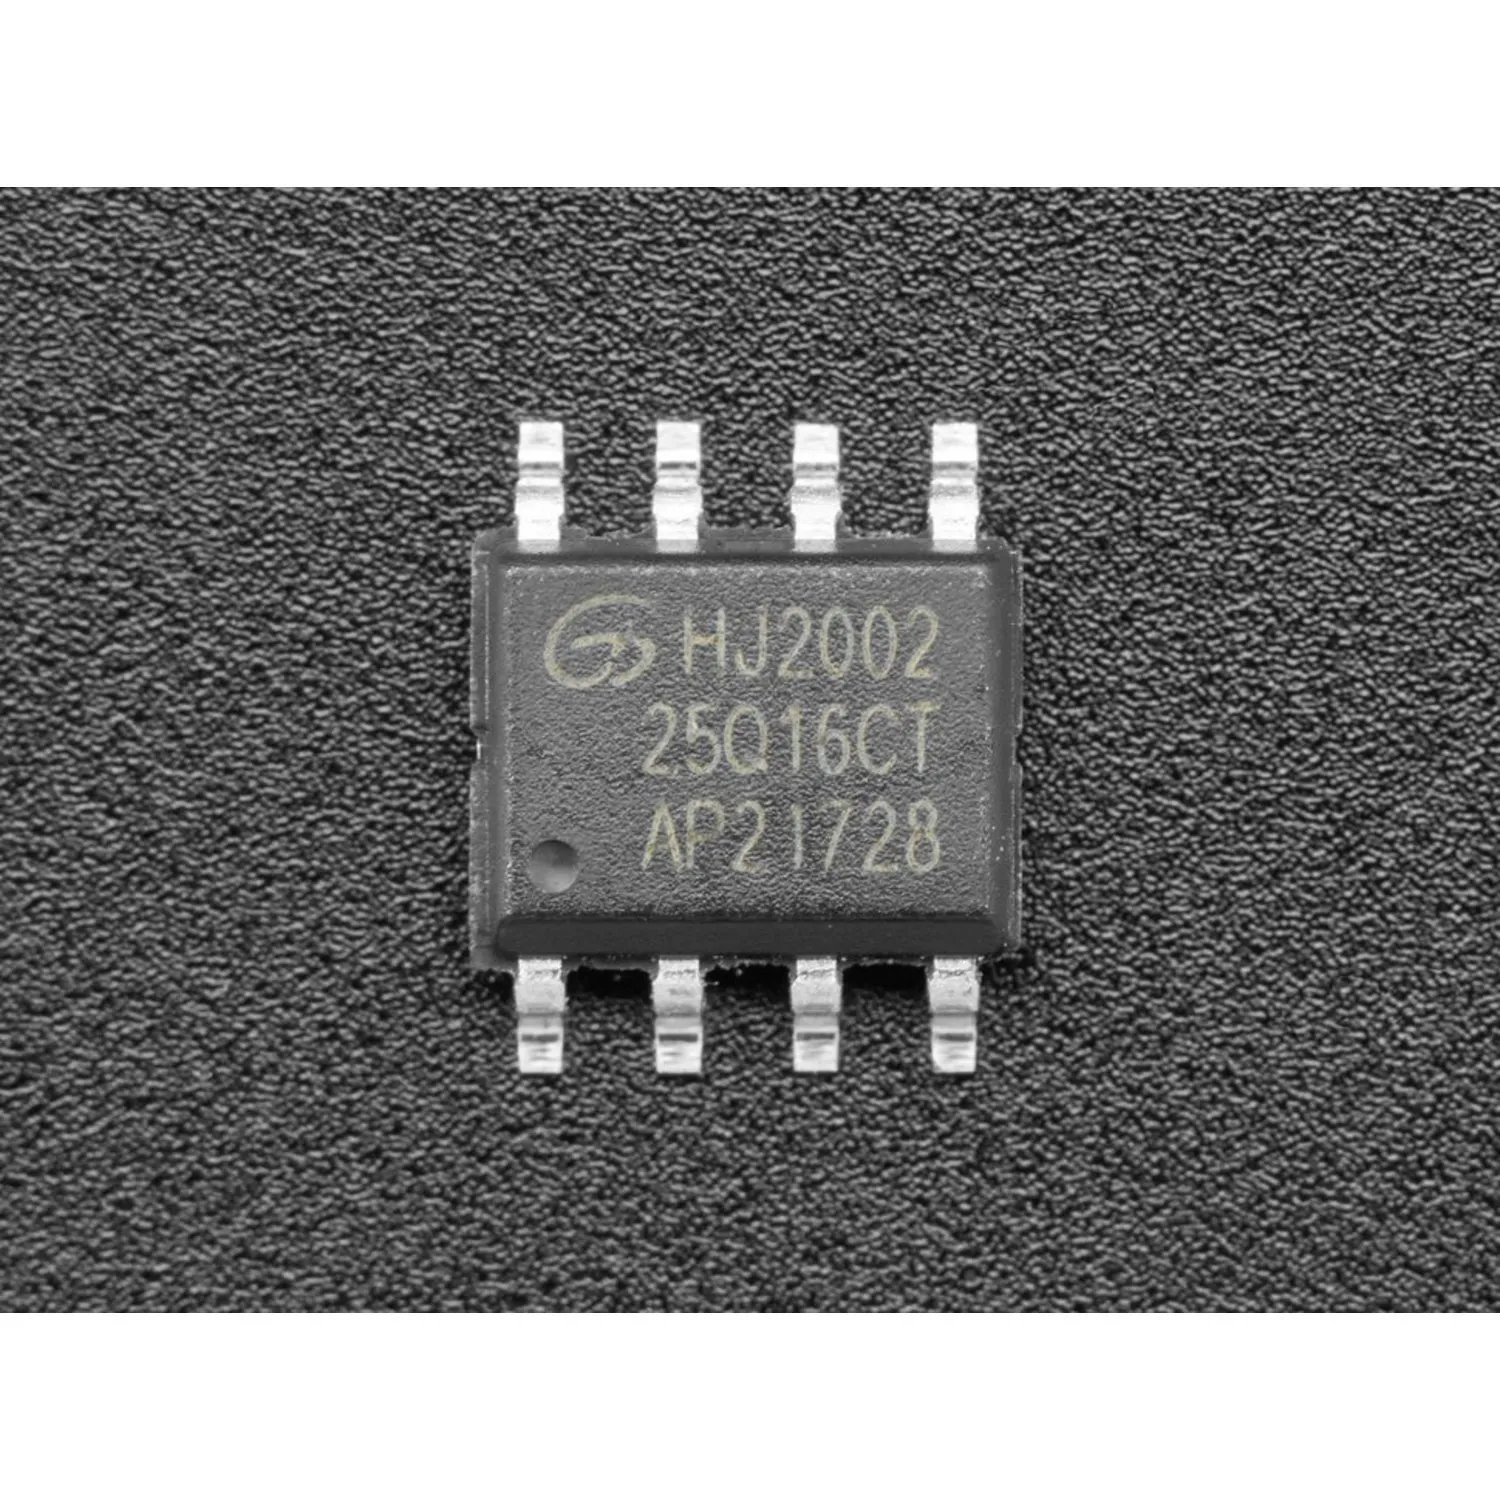 Photo of GD25Q16 - 2MB SPI Flash in 8-Pin SOIC package